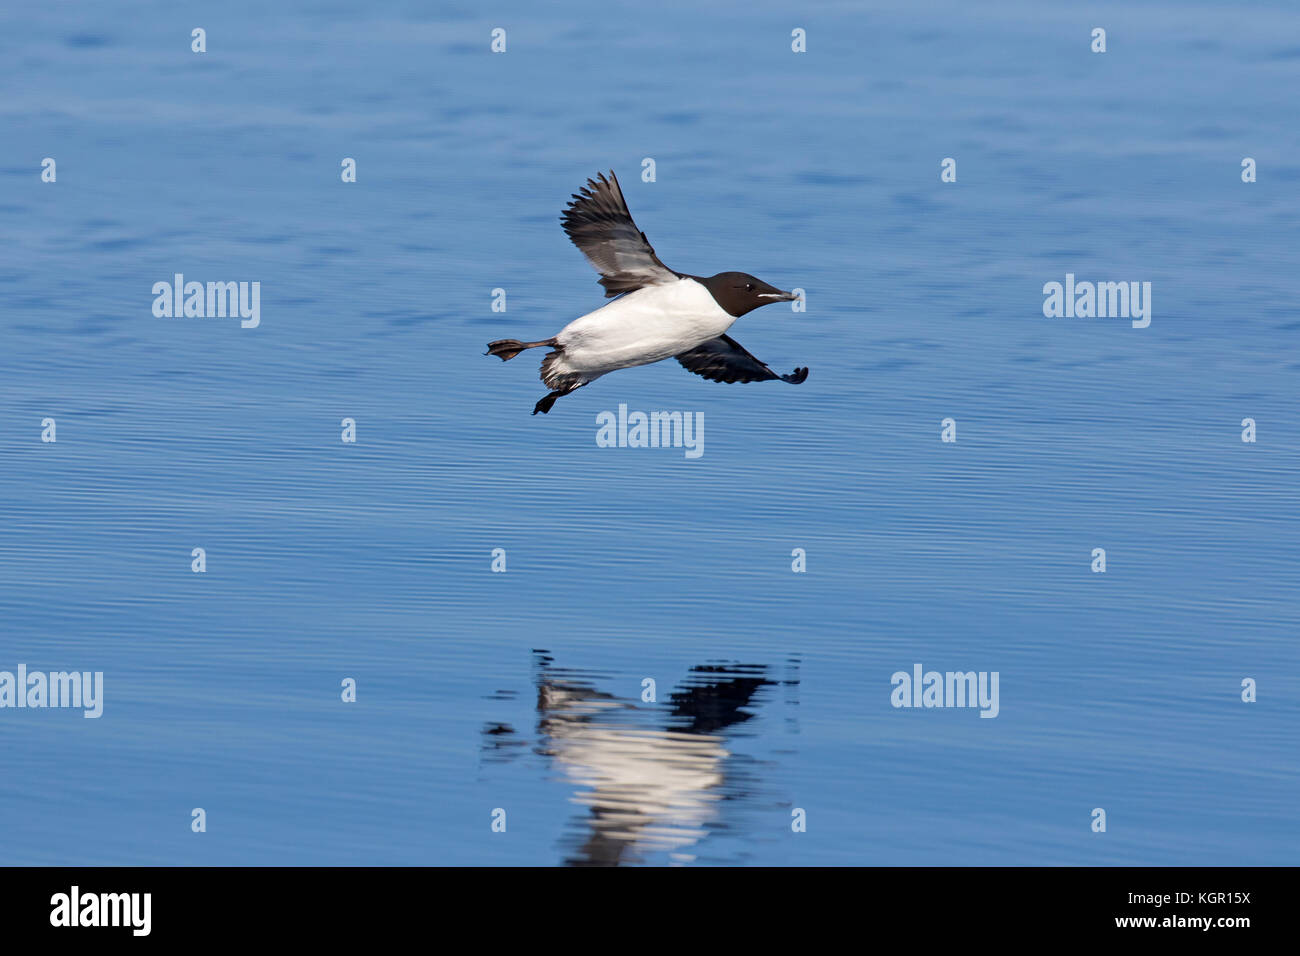 Thick-billed murre / Brünnich's guillemot (Uria lomvia) landing at sea with spread wings, native to the sub-polar regions of the Northern Hemisphere Stock Photo